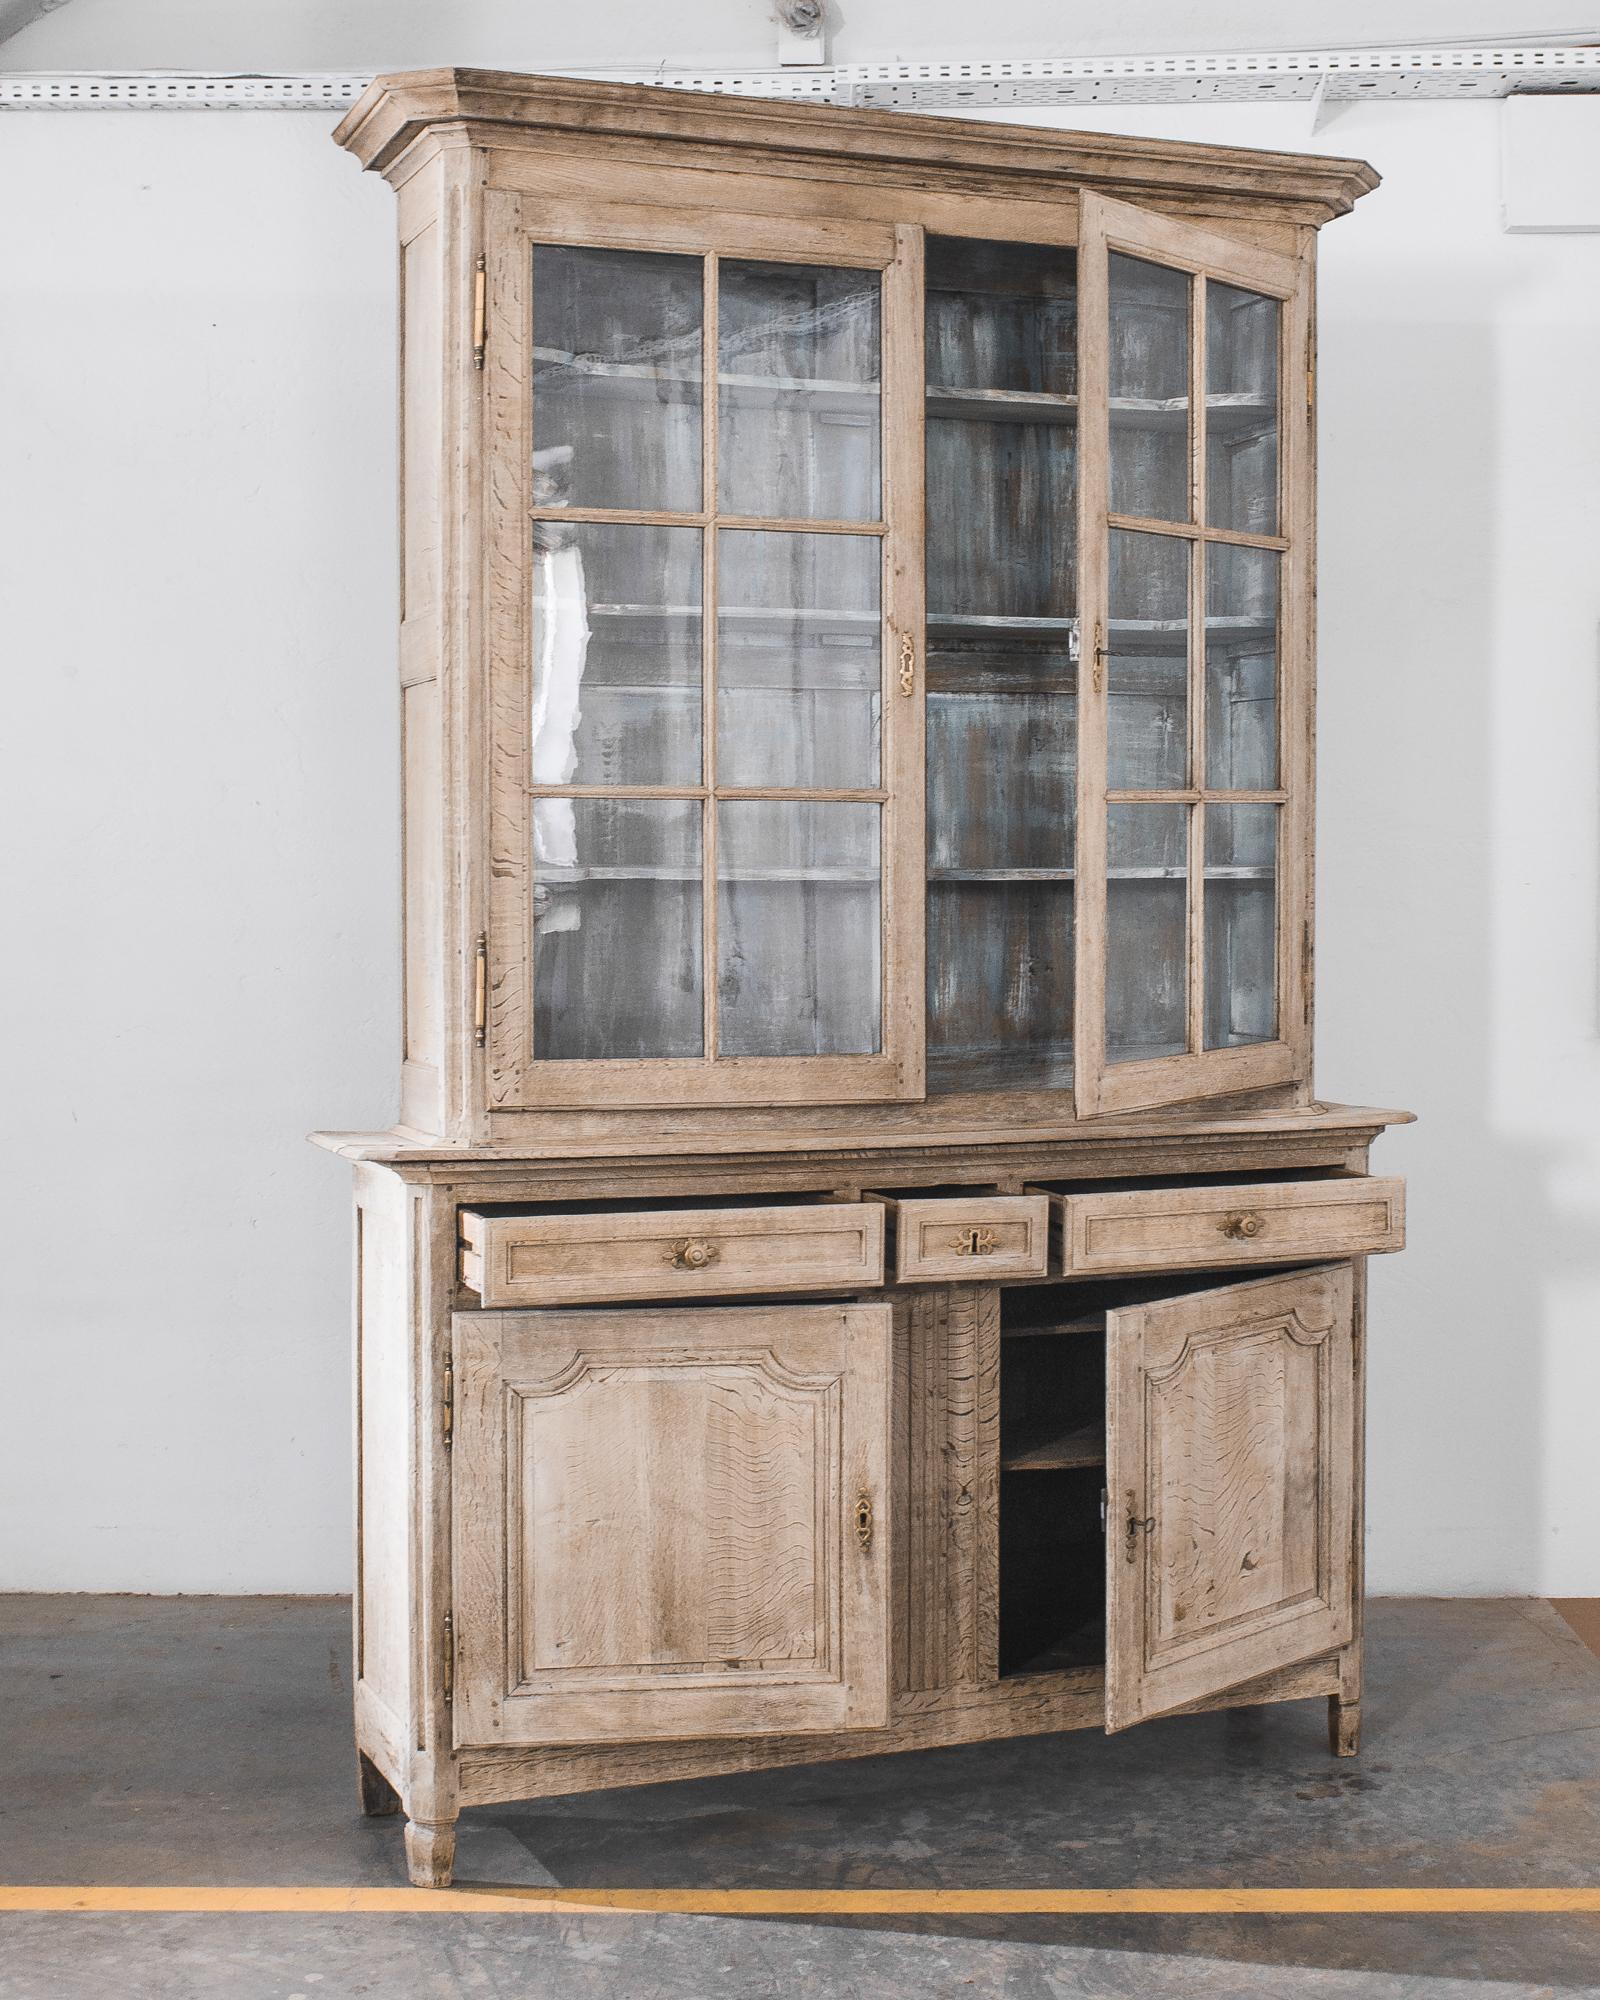 A two part wooden vitrine crafted in France circa 1850. This 103 inch tall antique chest offers plenty of storage space. The upper cupboard with fixed shelves and glazed doors to shed light on inherited family china and silver flatware. The lower